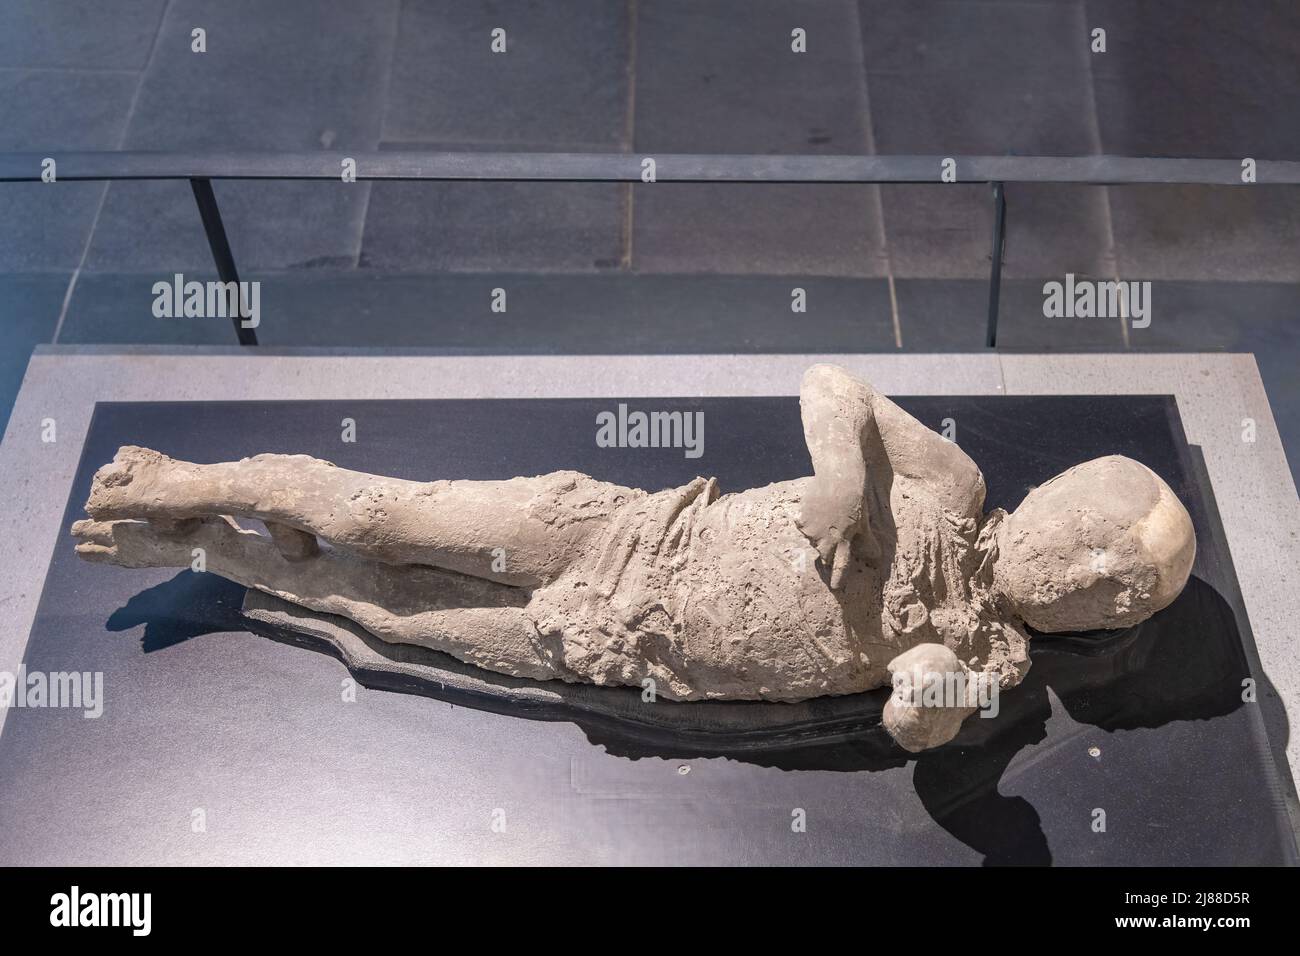 Pompeii, Italy - April 28, 2022. Plaster casts of Pompeii victims, at the 'Garden of the fugitives'. Pompeii was an ancient Roman city which was destr Stock Photo